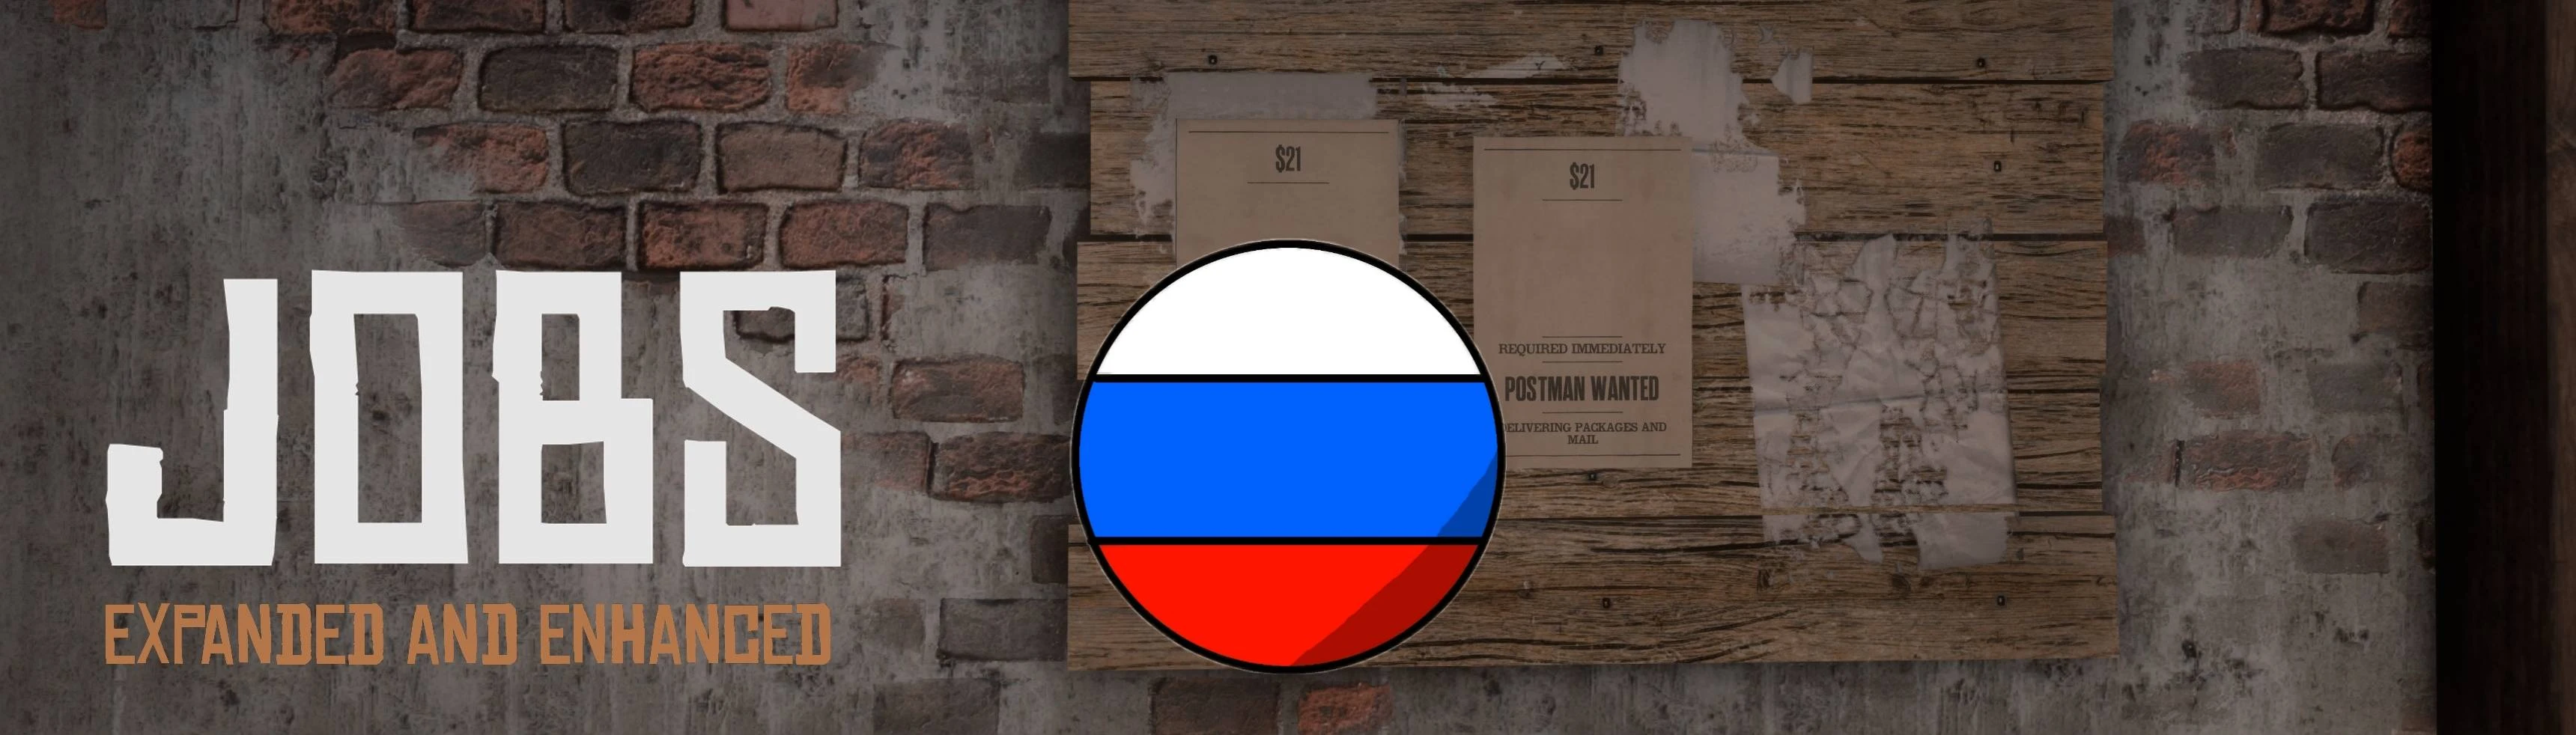 Jobs - Expanded And Enhanced - Russian Translation At Red Dead.